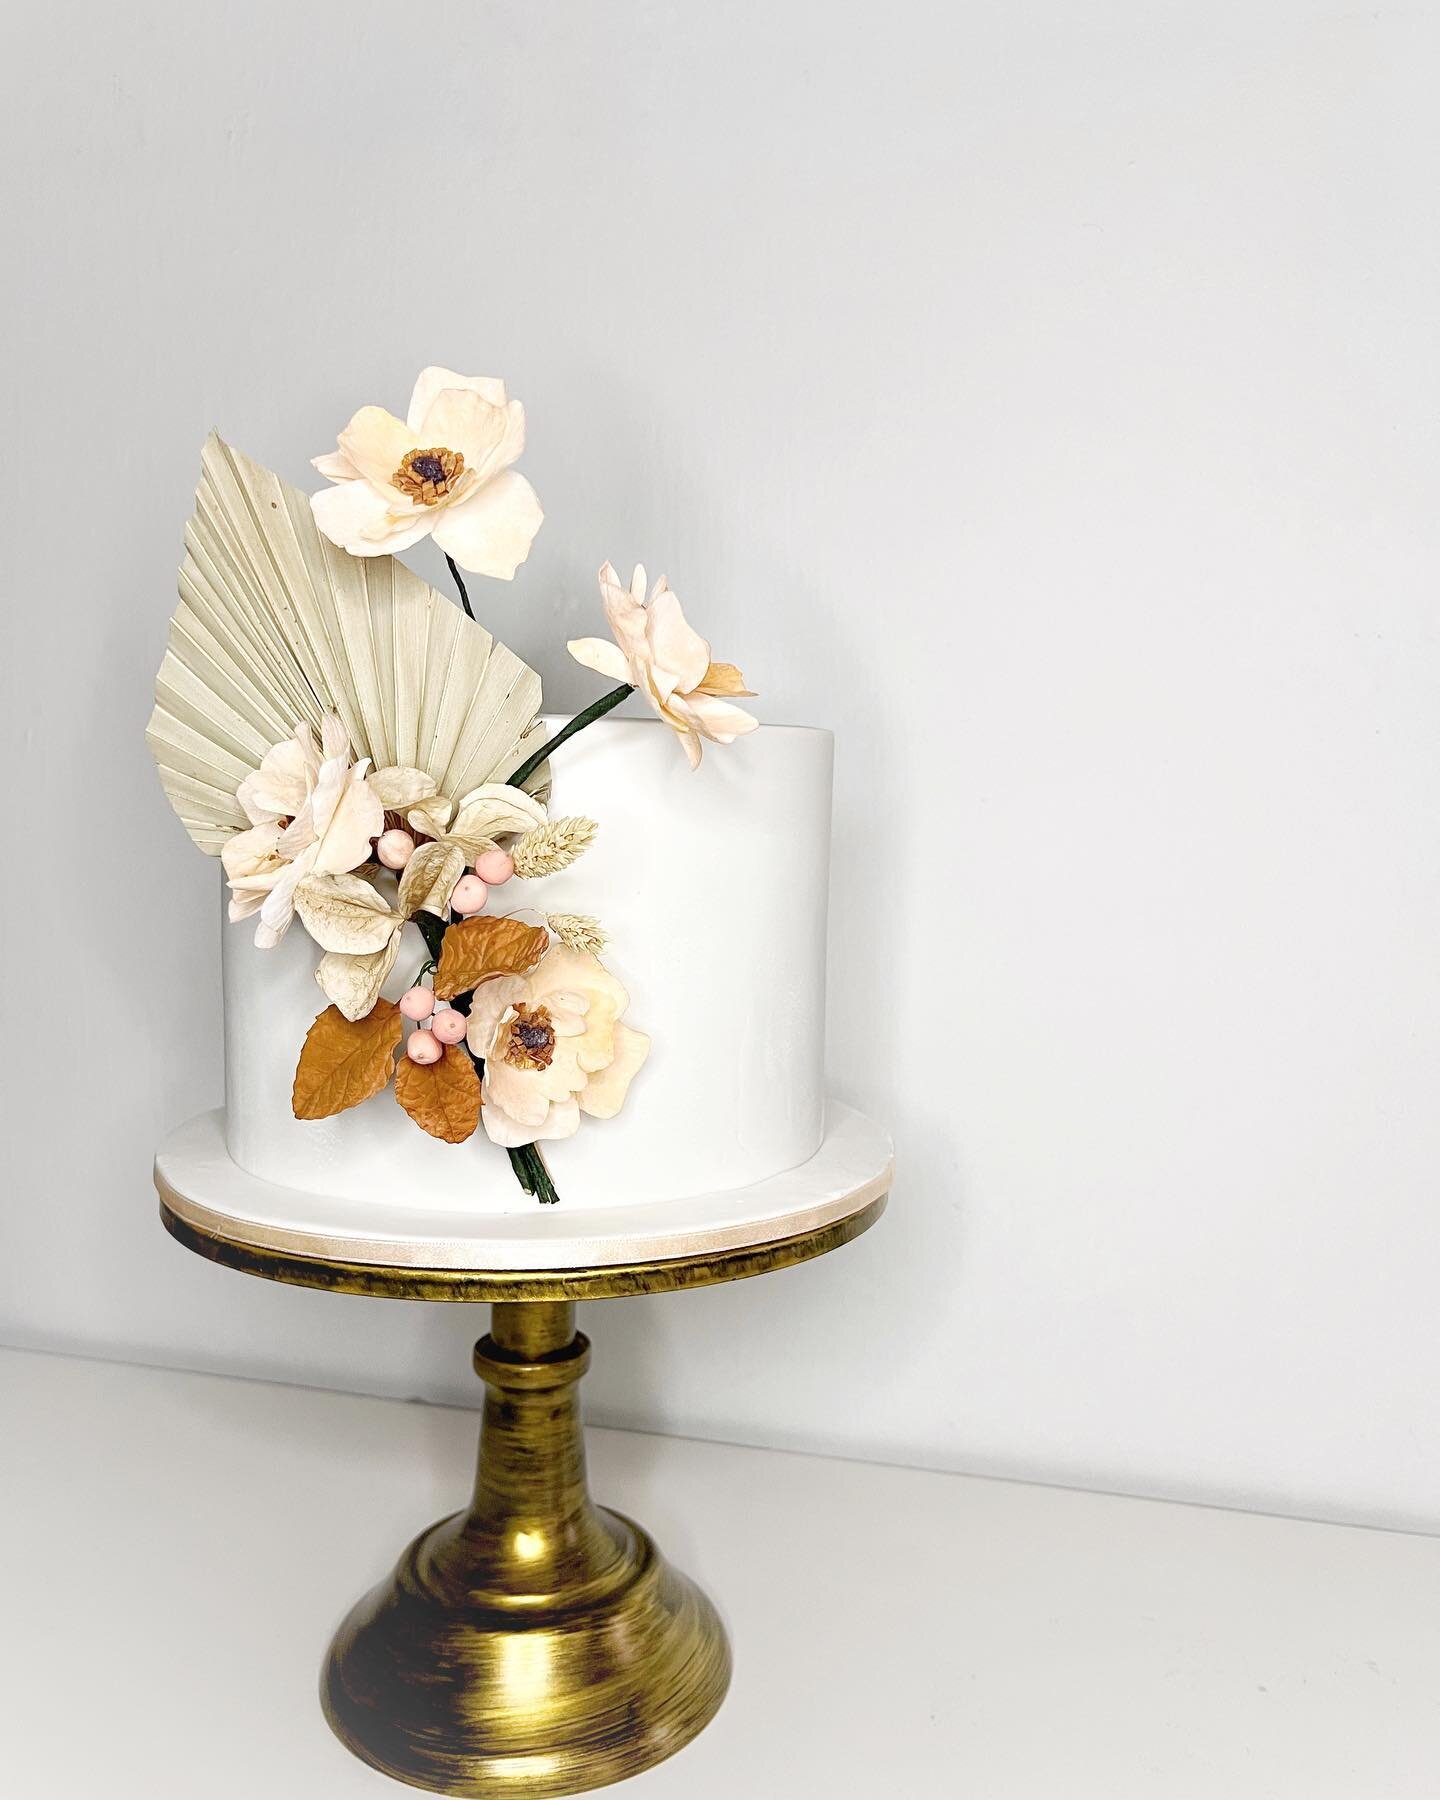 This cake features a mixture of different mediums. Wafer paper, sugar flowers and preserved flowers ✨ #CakeVowWeddings